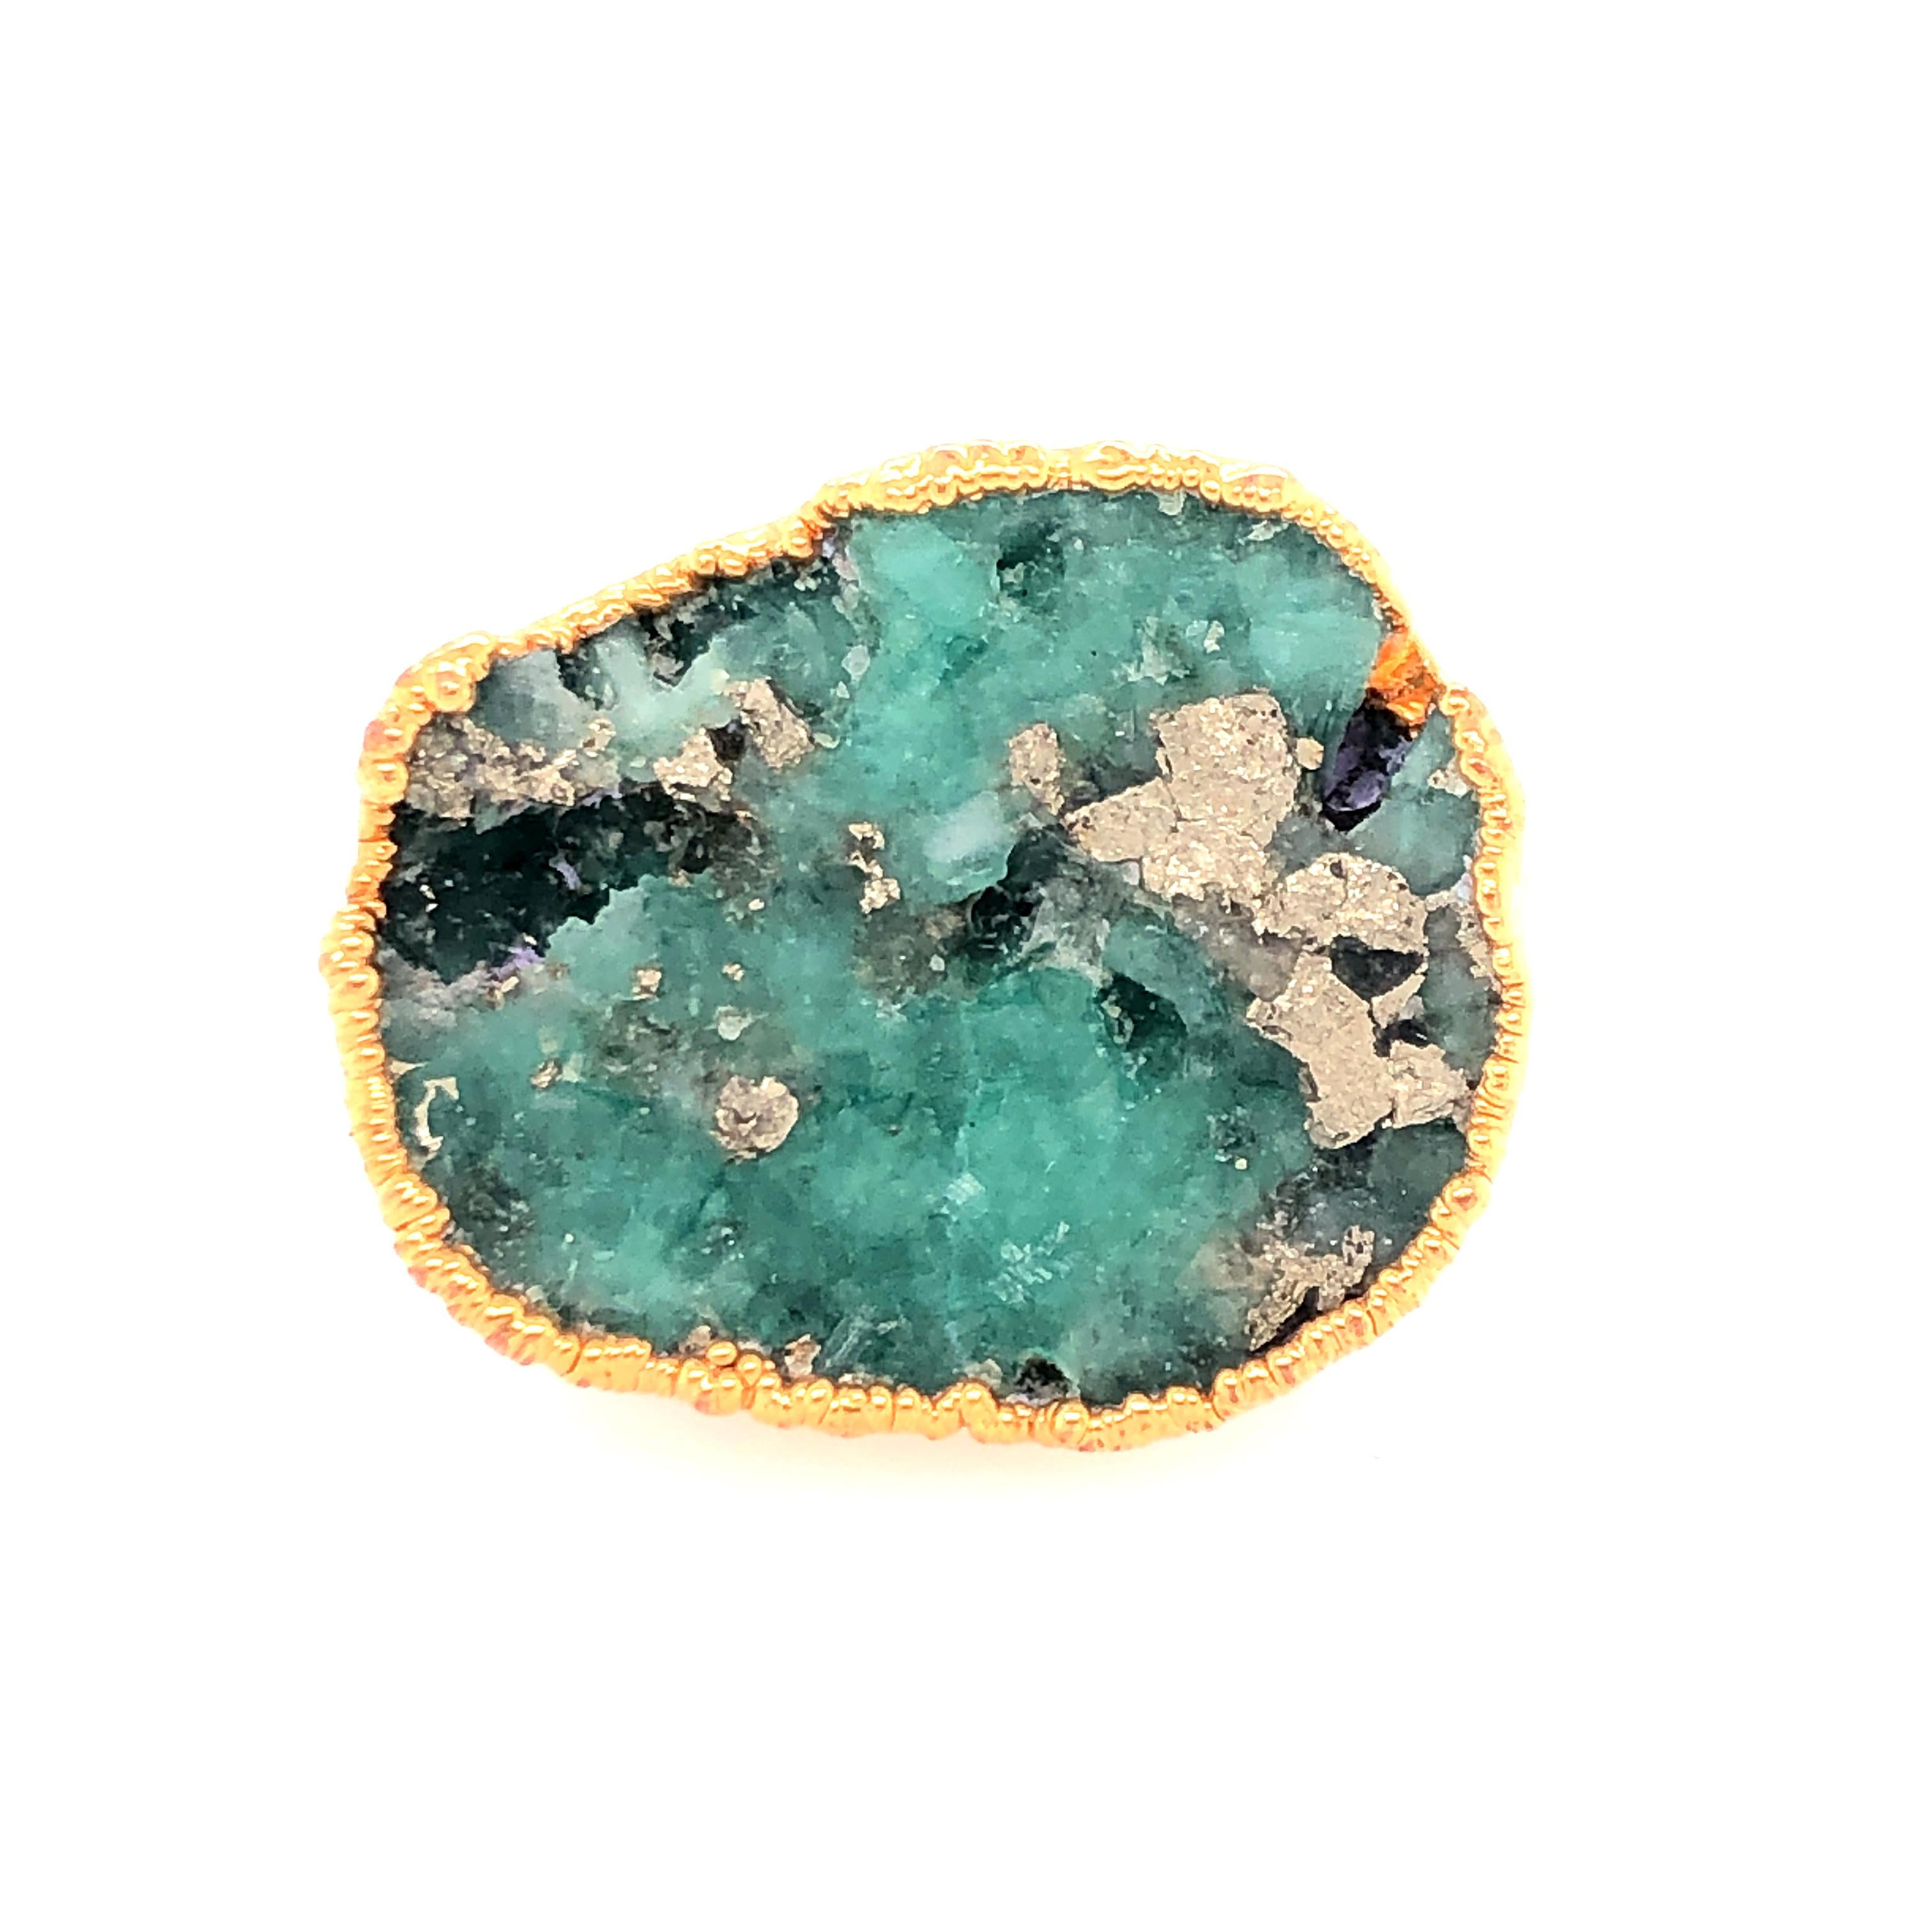 The natural formations of pyrite in this emerald ring make it just that much richer. The irregular forms of the emerald are embraced by the pyrite creating glimmering canyons. The emerald sits on its horn ring wrapped in gold accent. 

Size: 7